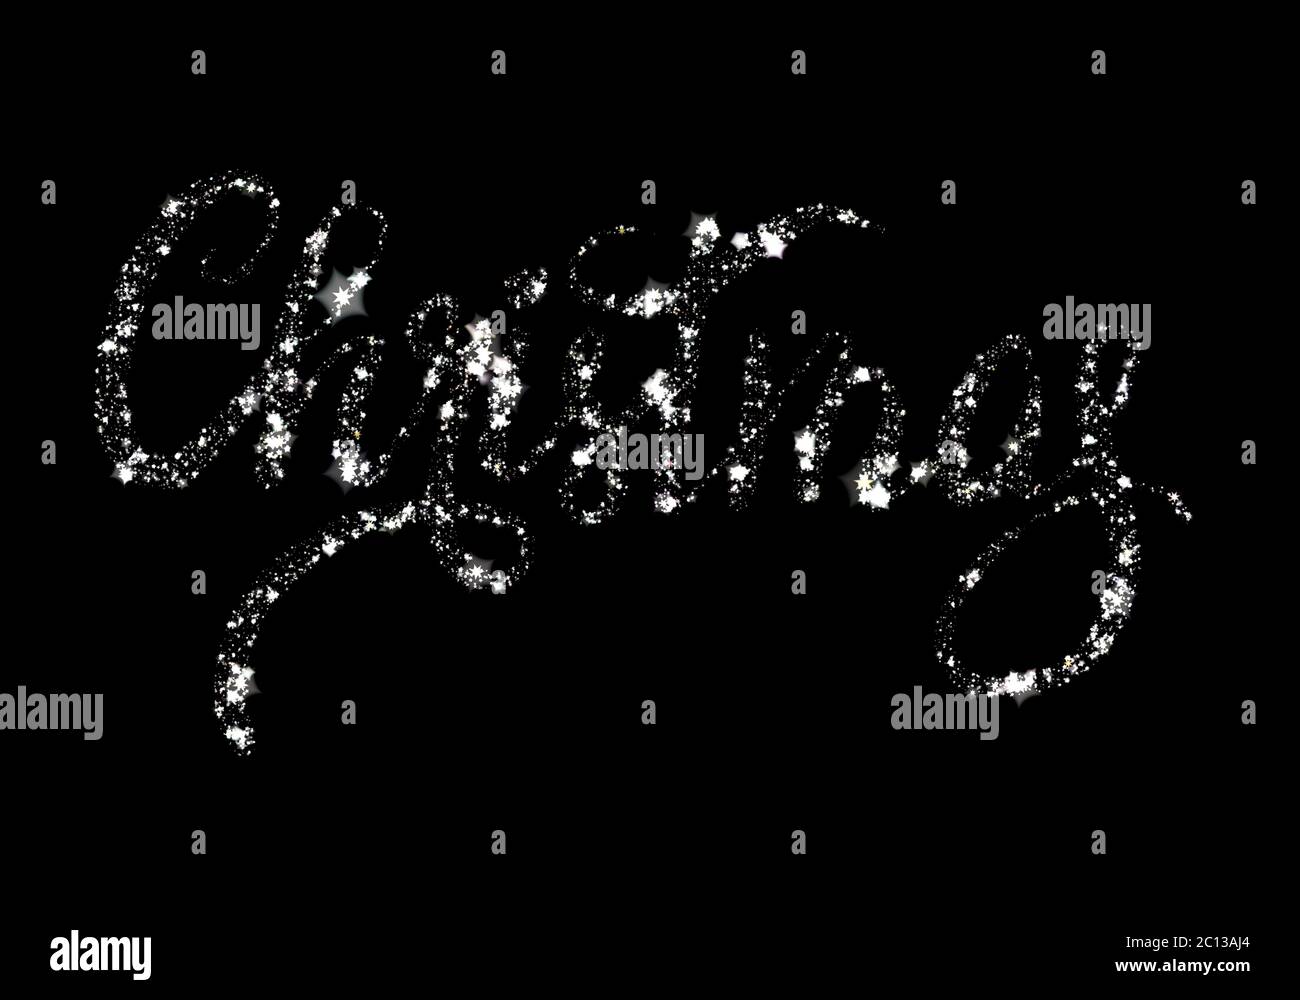 merry christmas lettering written by shining stars isolated over black background Stock Photo